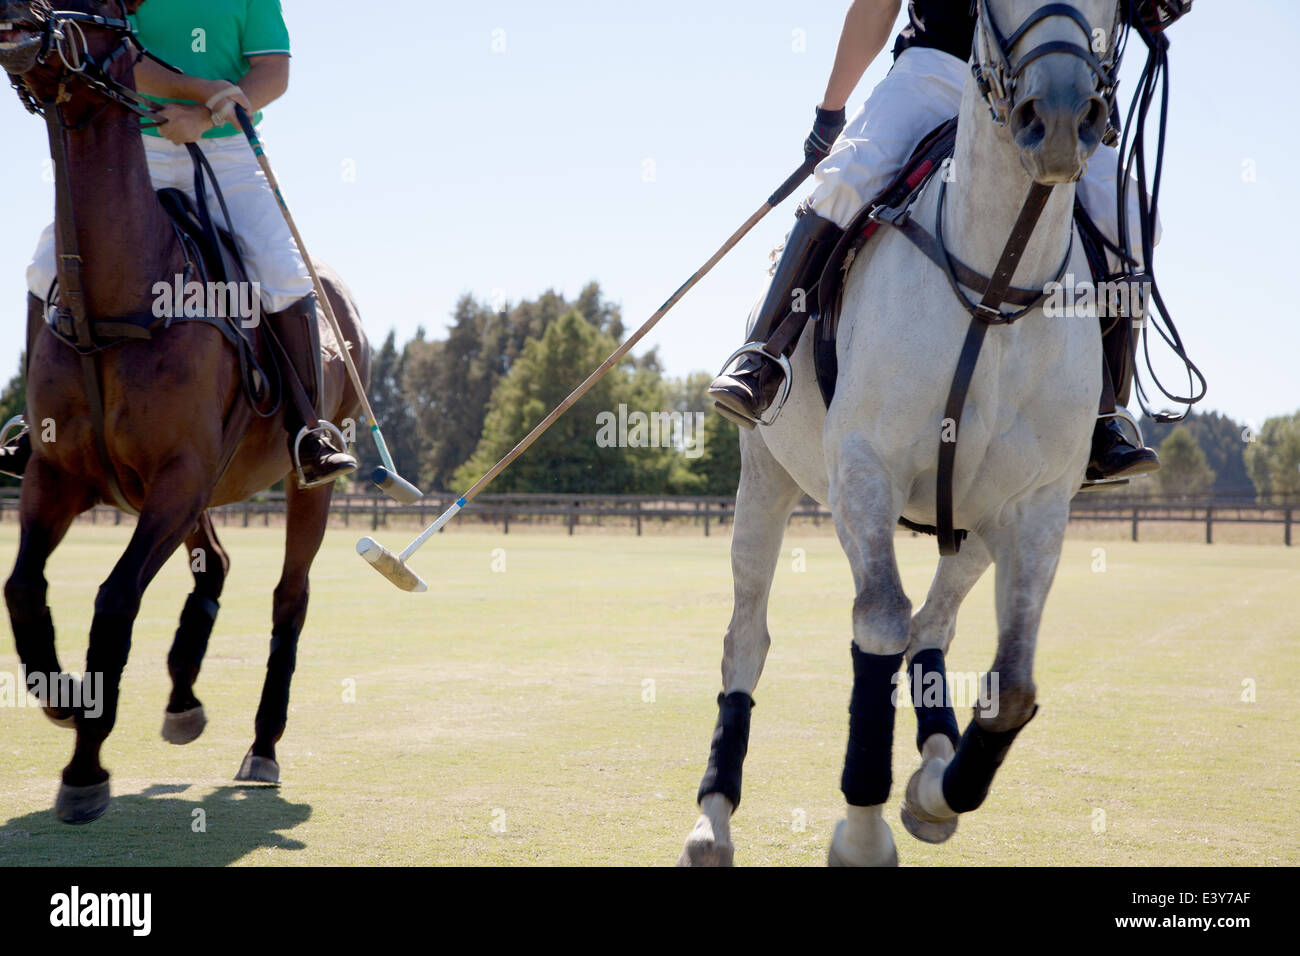 Two adult men playing polo Stock Photo